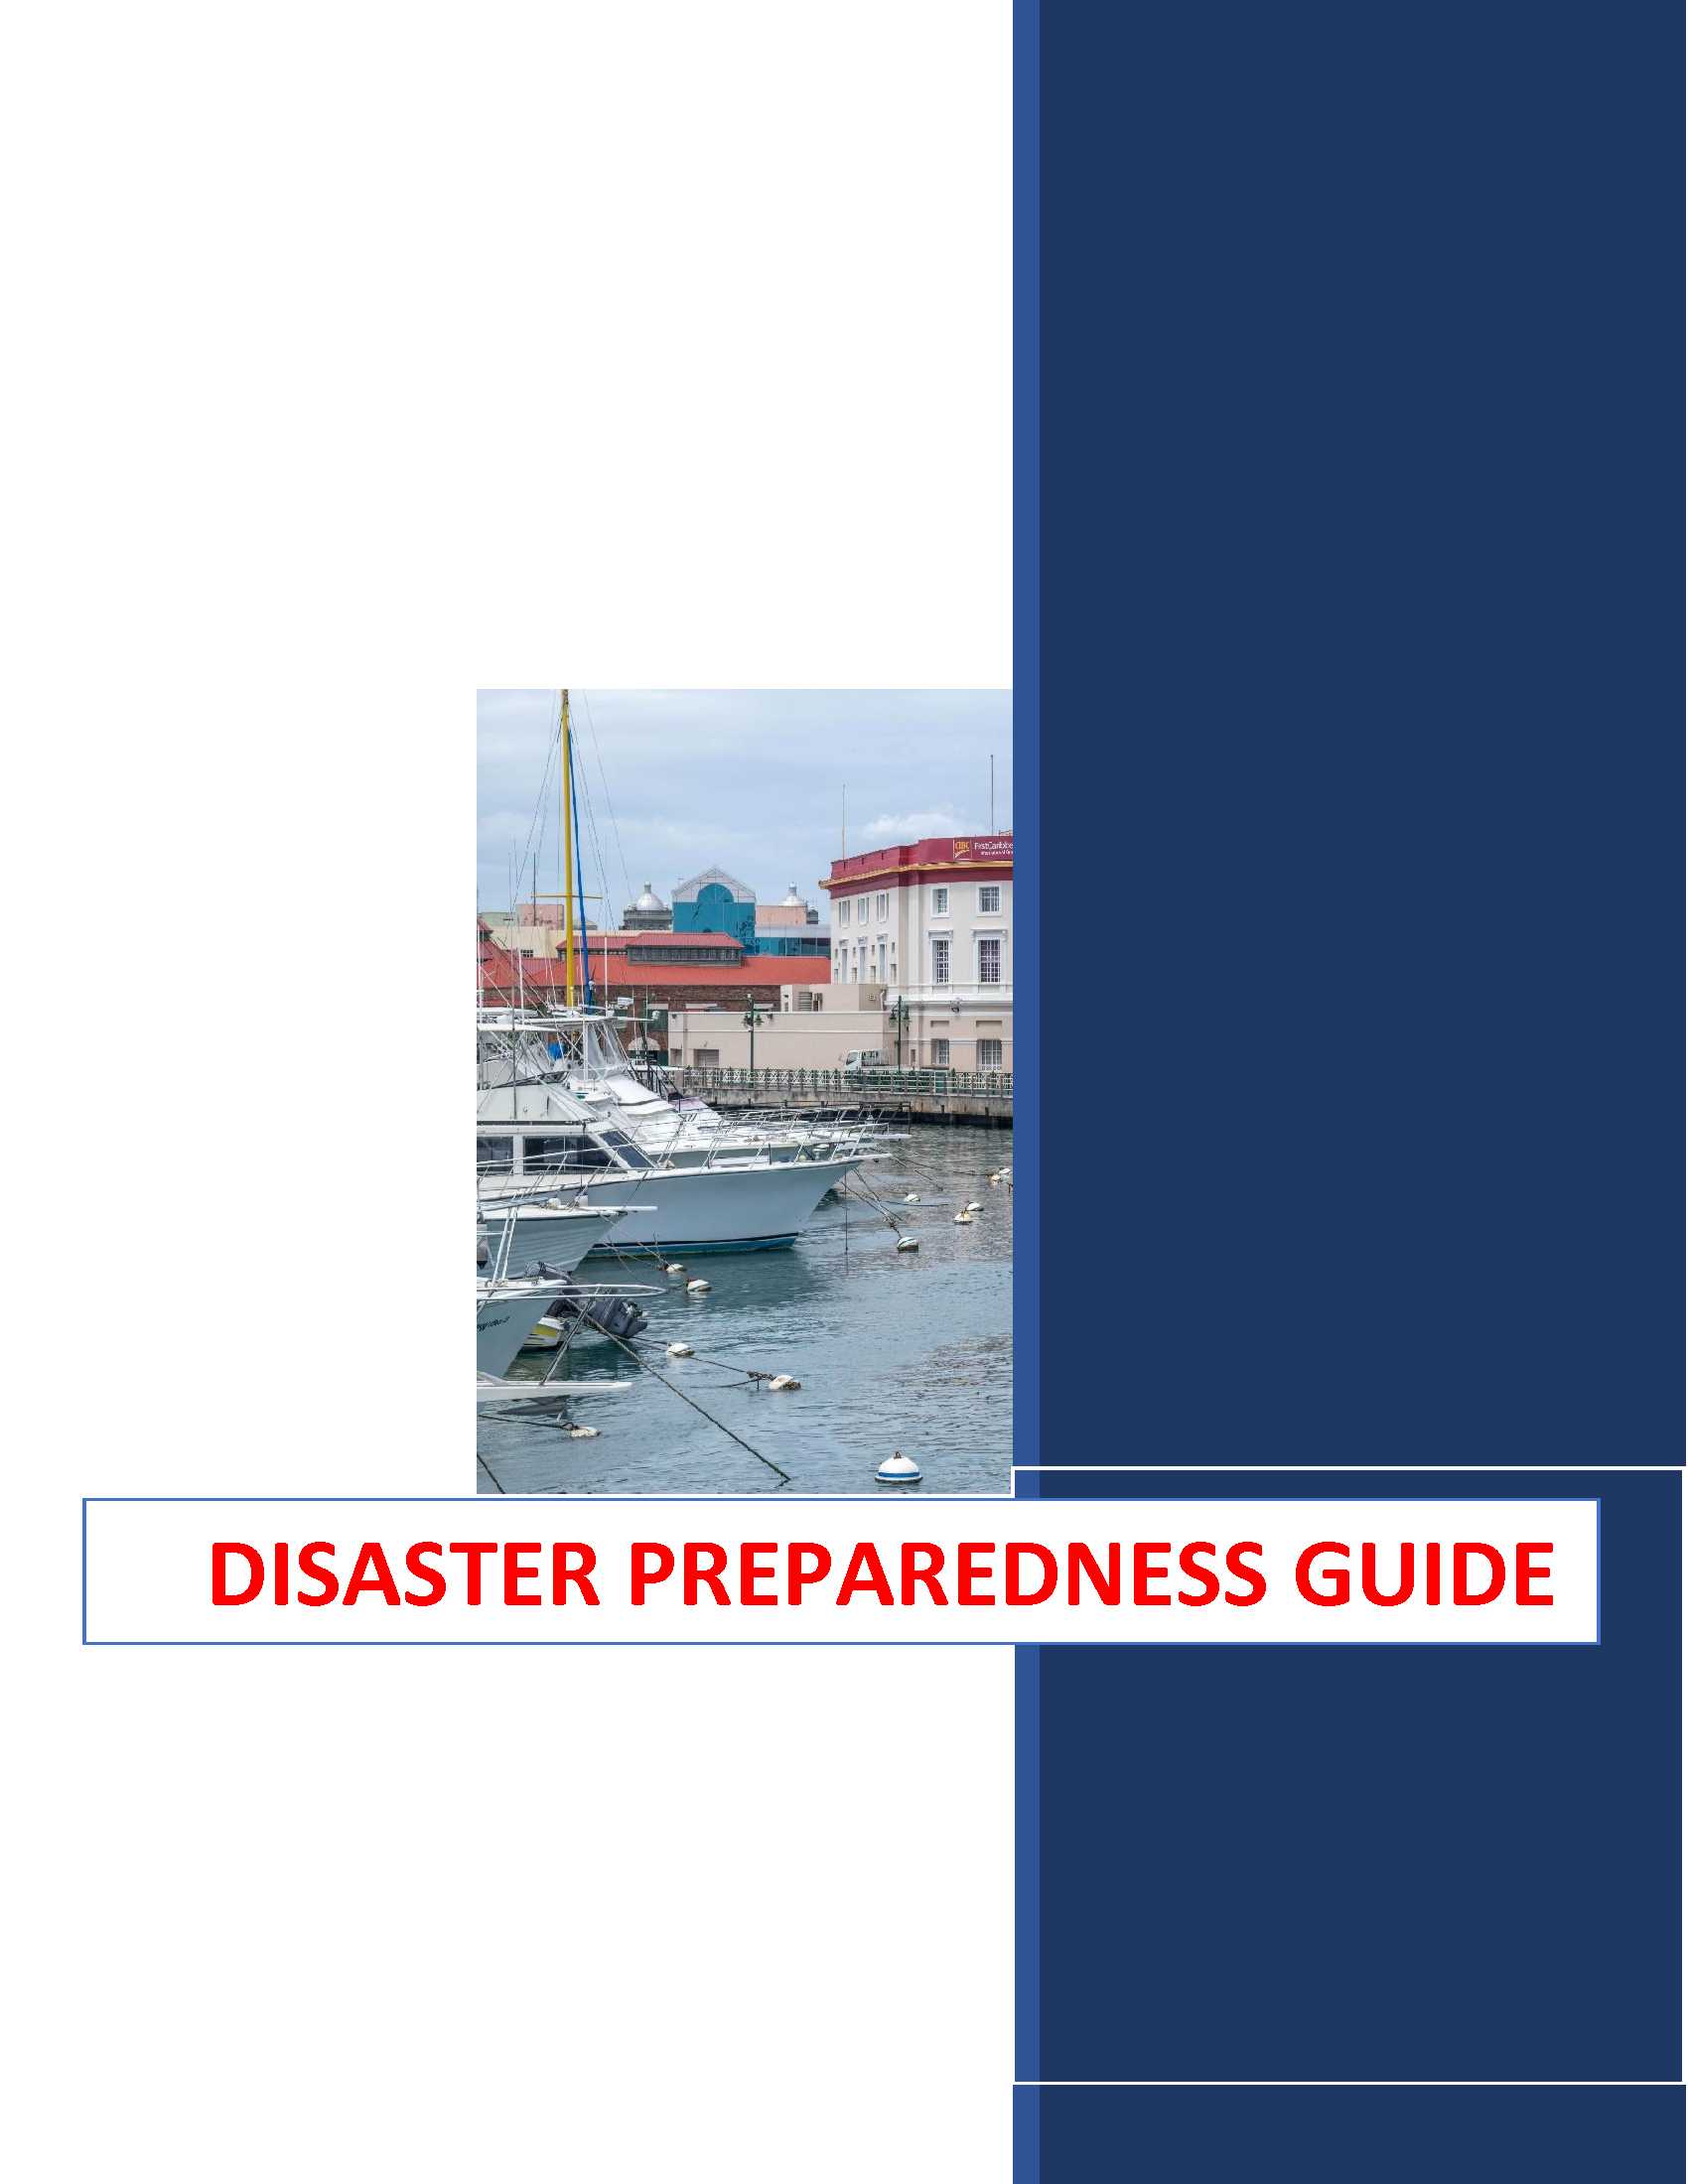 Saving Our Selves: A Disaster Preparedness Guide